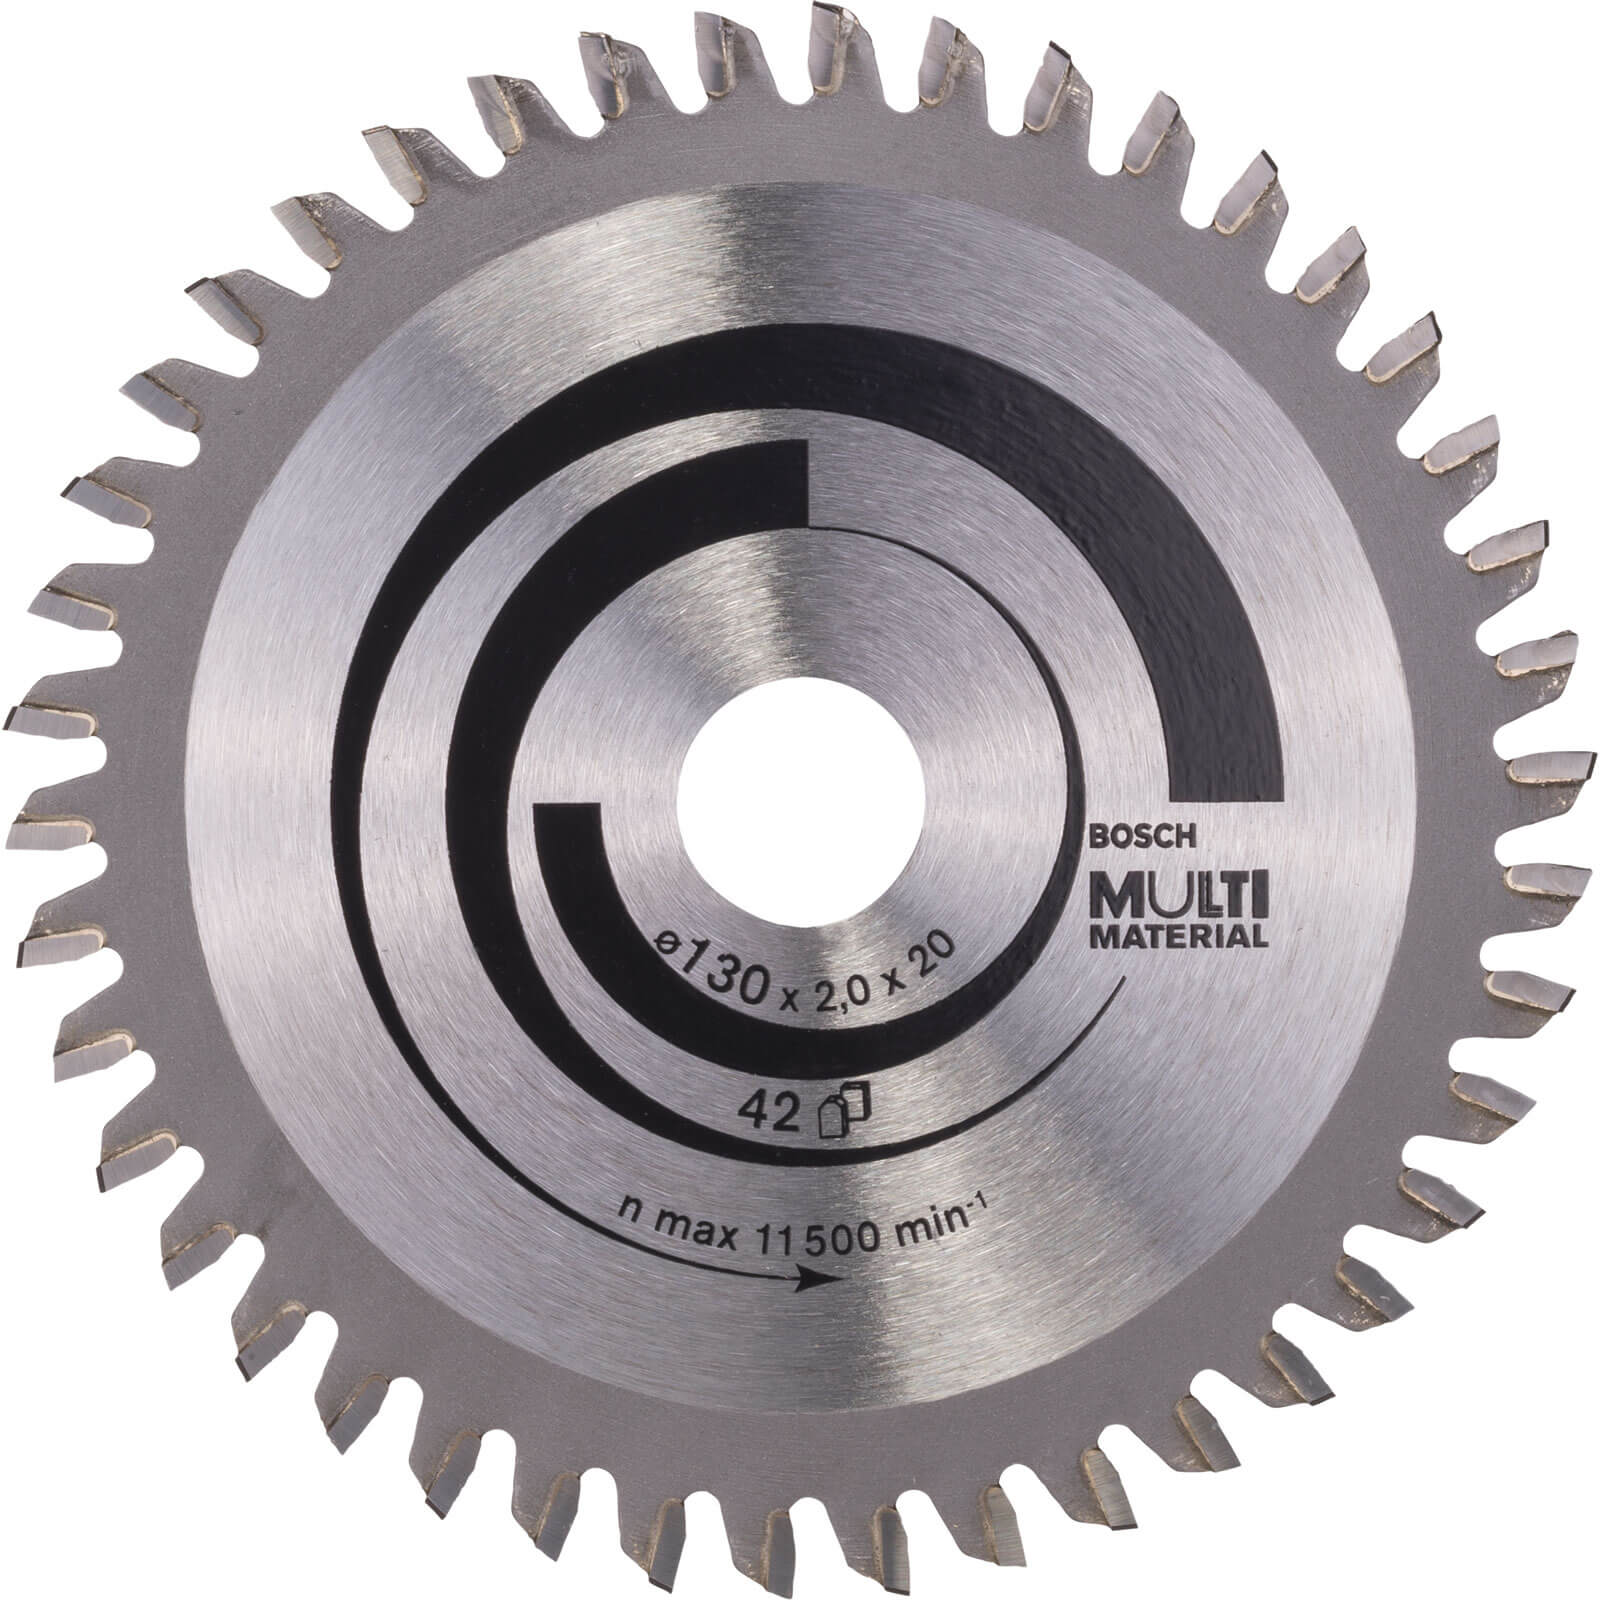 Image of Bosch Multi Material Cutting Saw Blade 130mm 42T 20mm